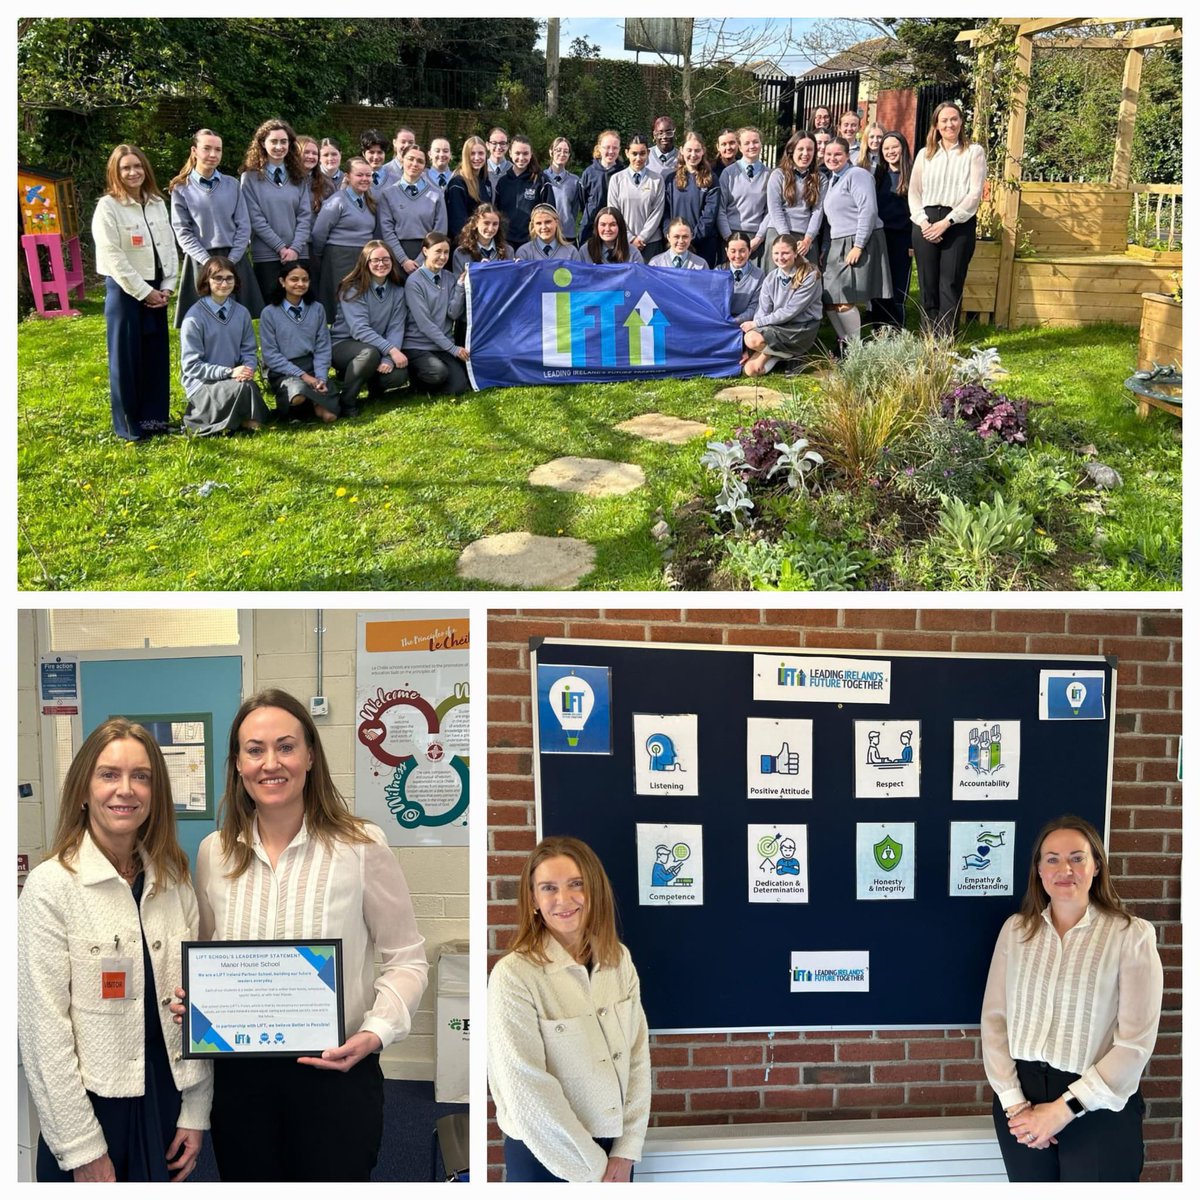 Very proud to be one of just 27 schools to be presented with the @LiFTIreland school flag for our commitment to student leadership @ManorHseRaheny. Many thanks to Sarah-Lyn @LiFTIreland for visiting us this morning. @lecheiletrust1 #studentvoice